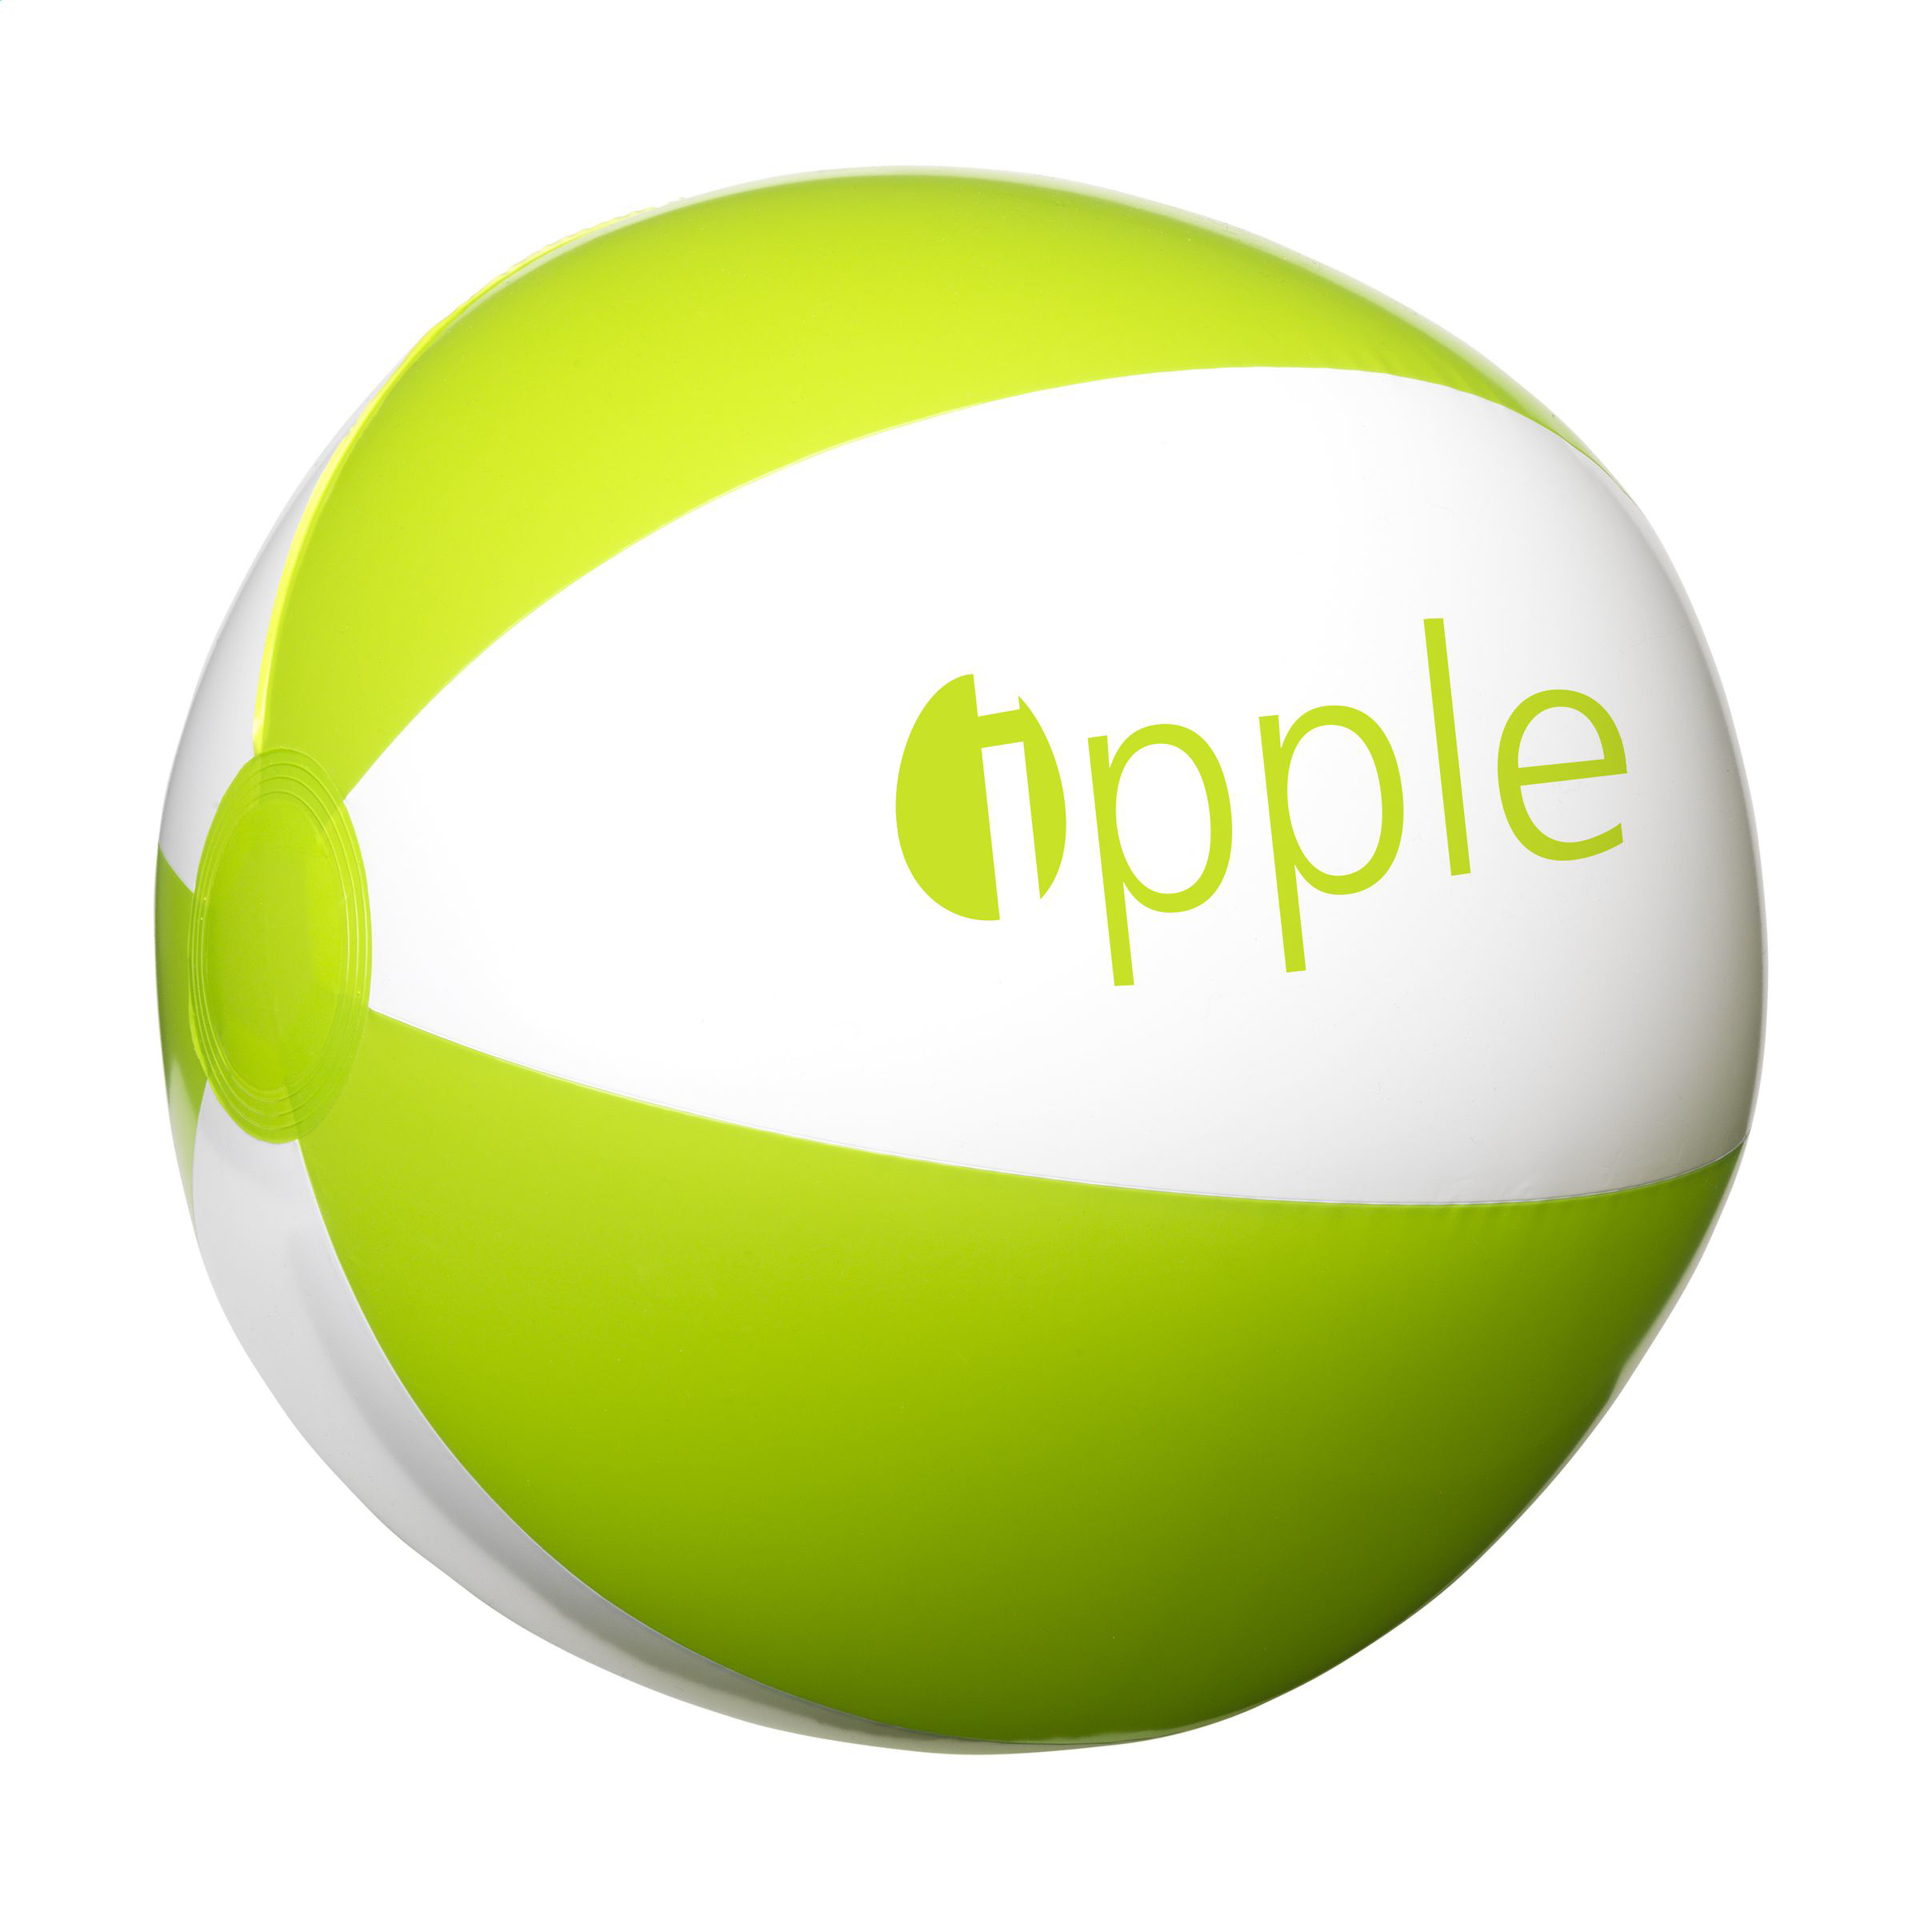 beach ball with white and green panels